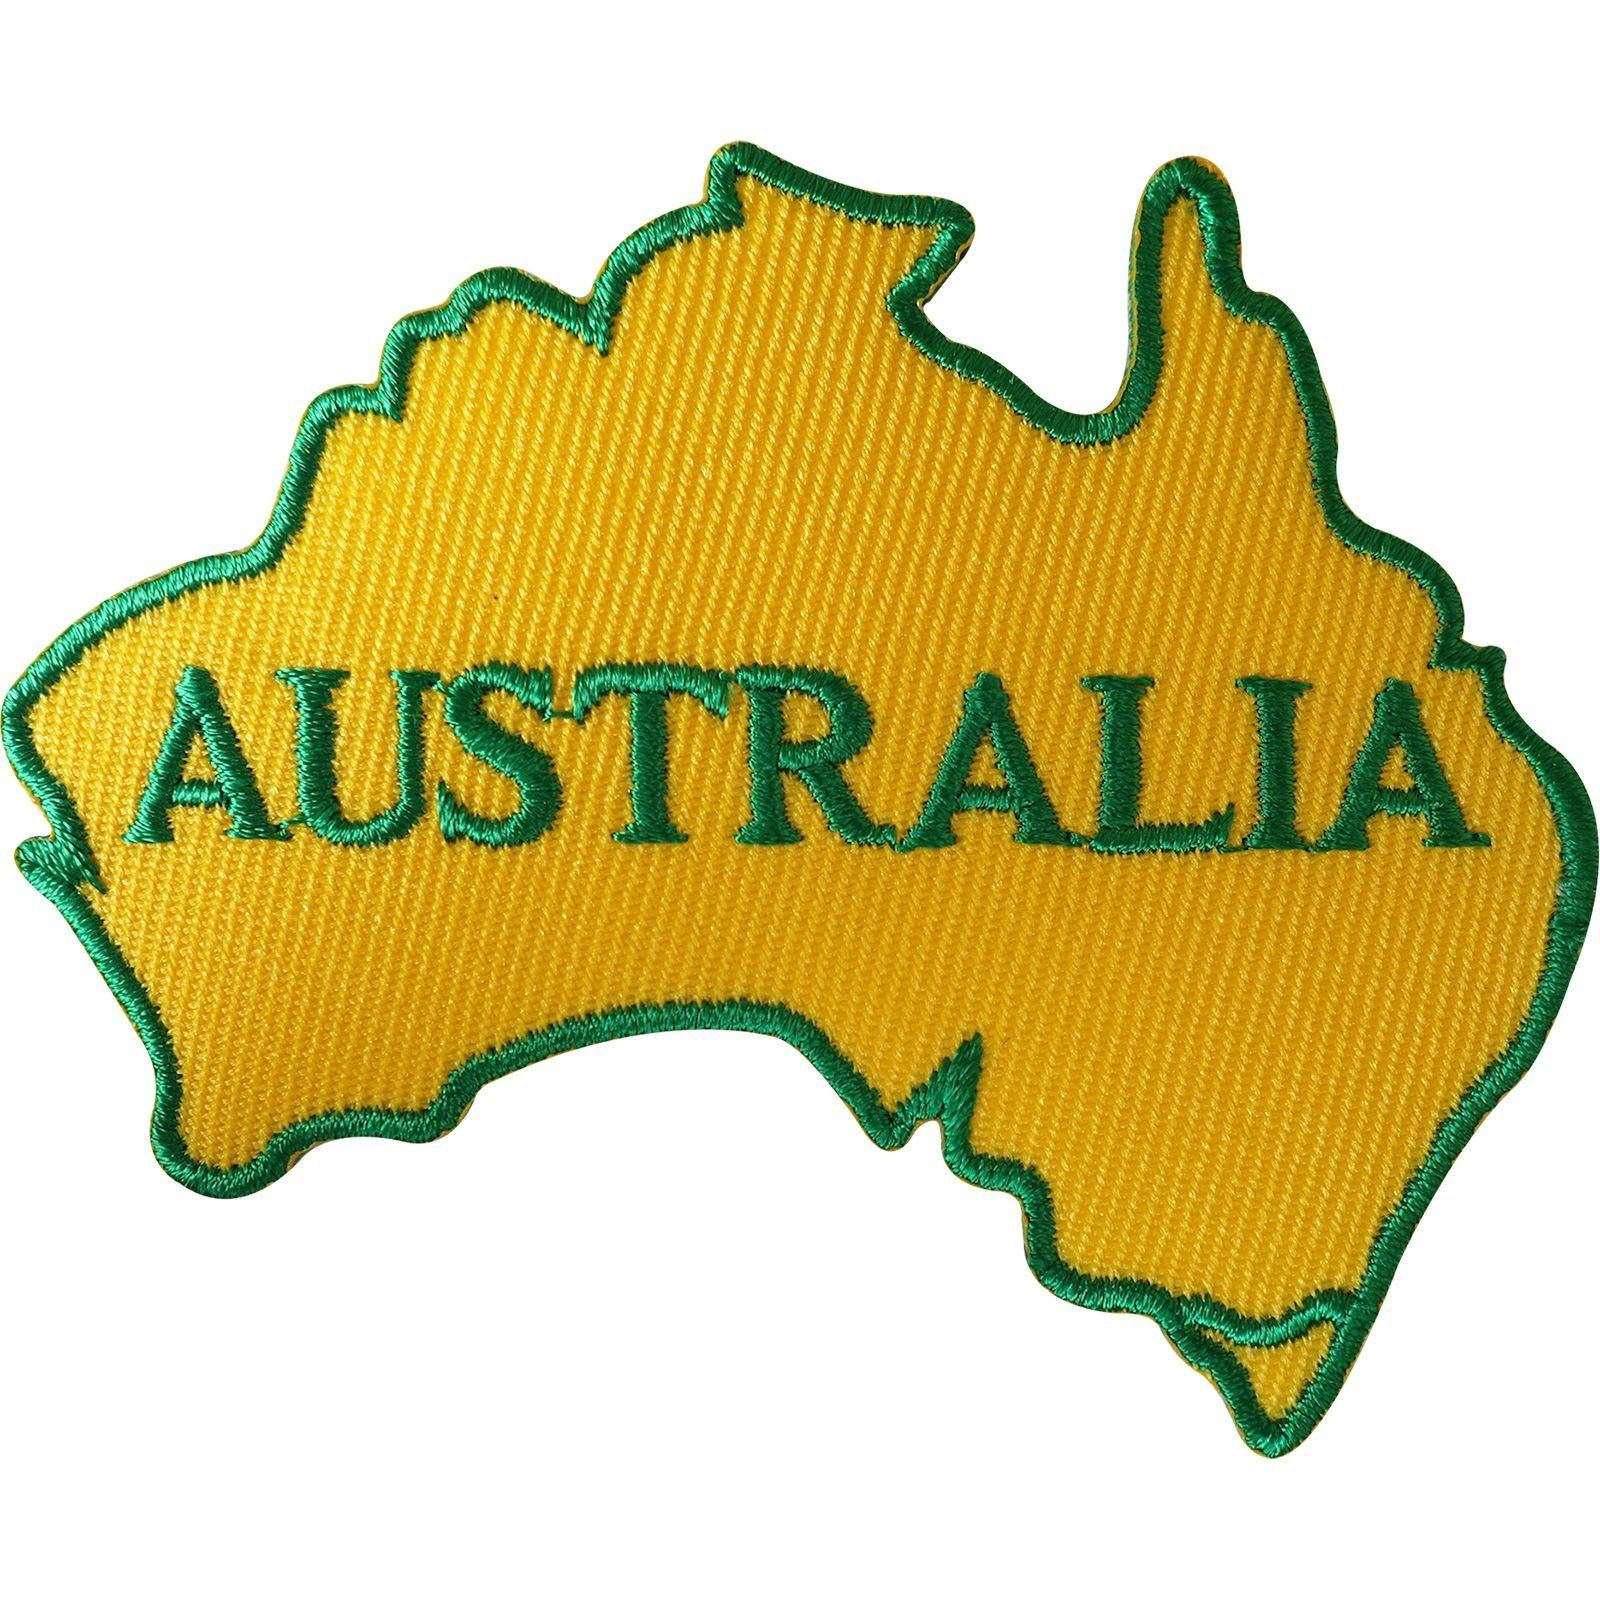 Australia Patch Iron On Sew On Clothes Jacket Jeans Australian Embroidered Badge